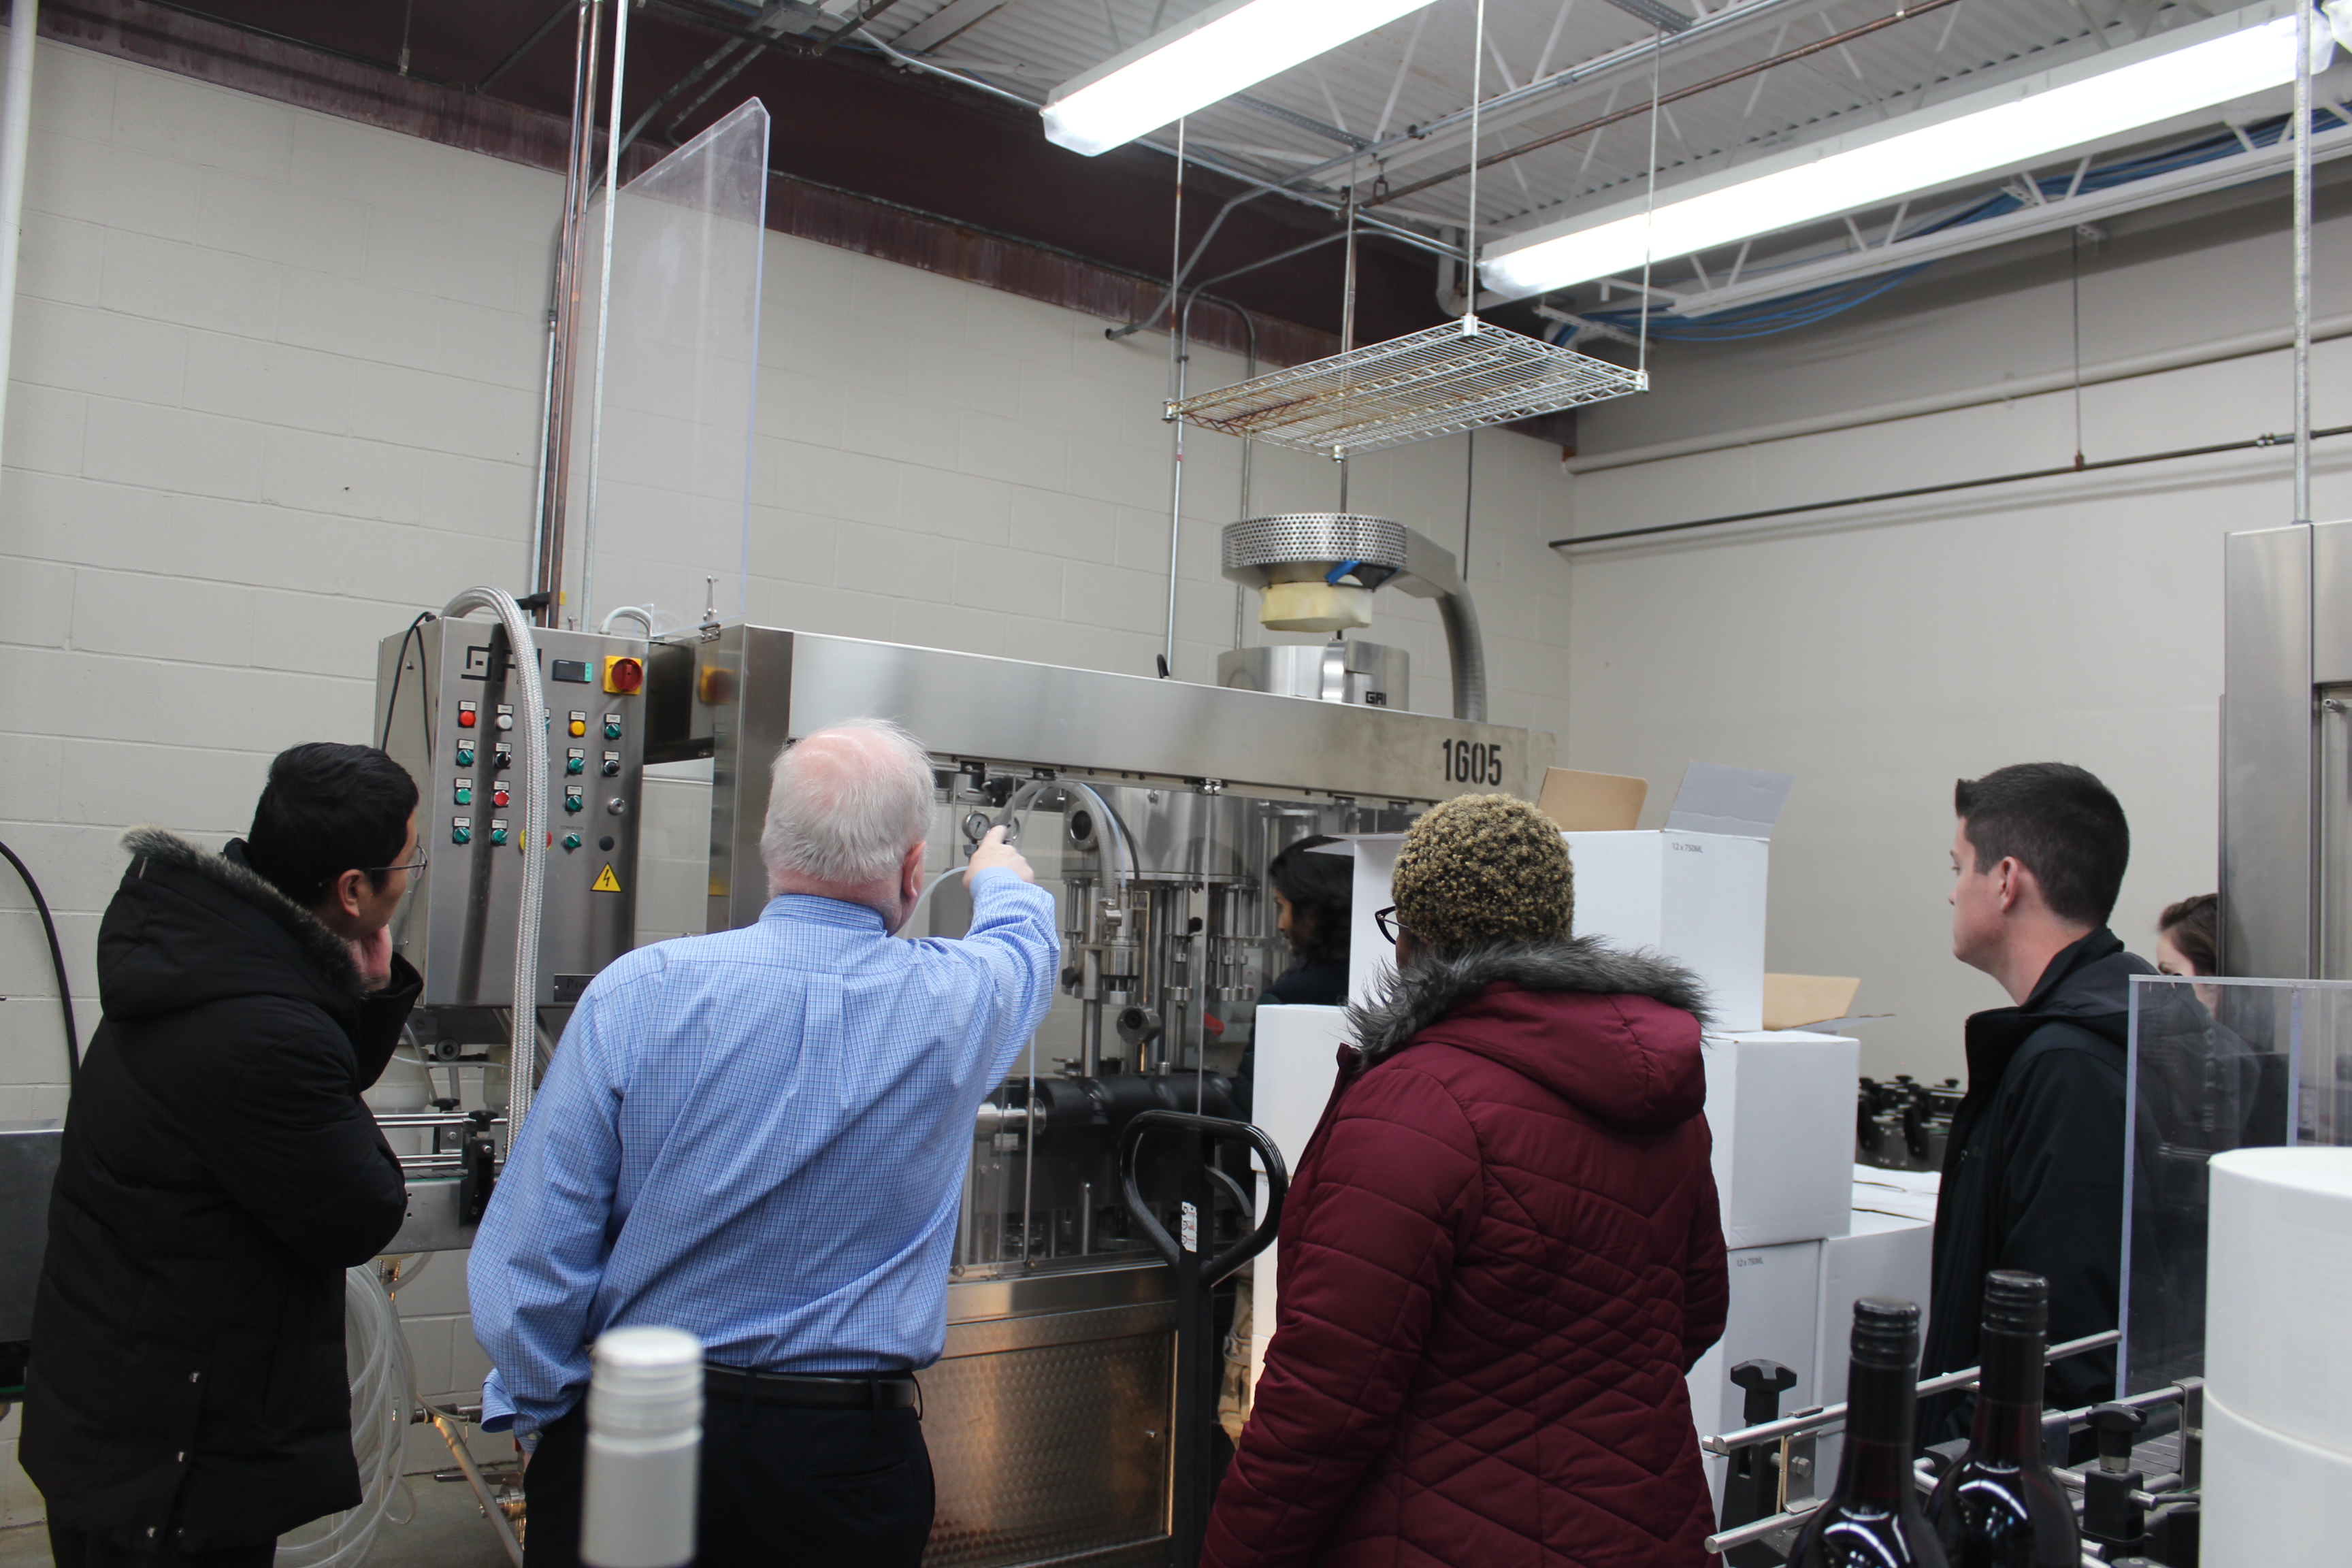 Three international students being shown a production machine by a local manufacturing company